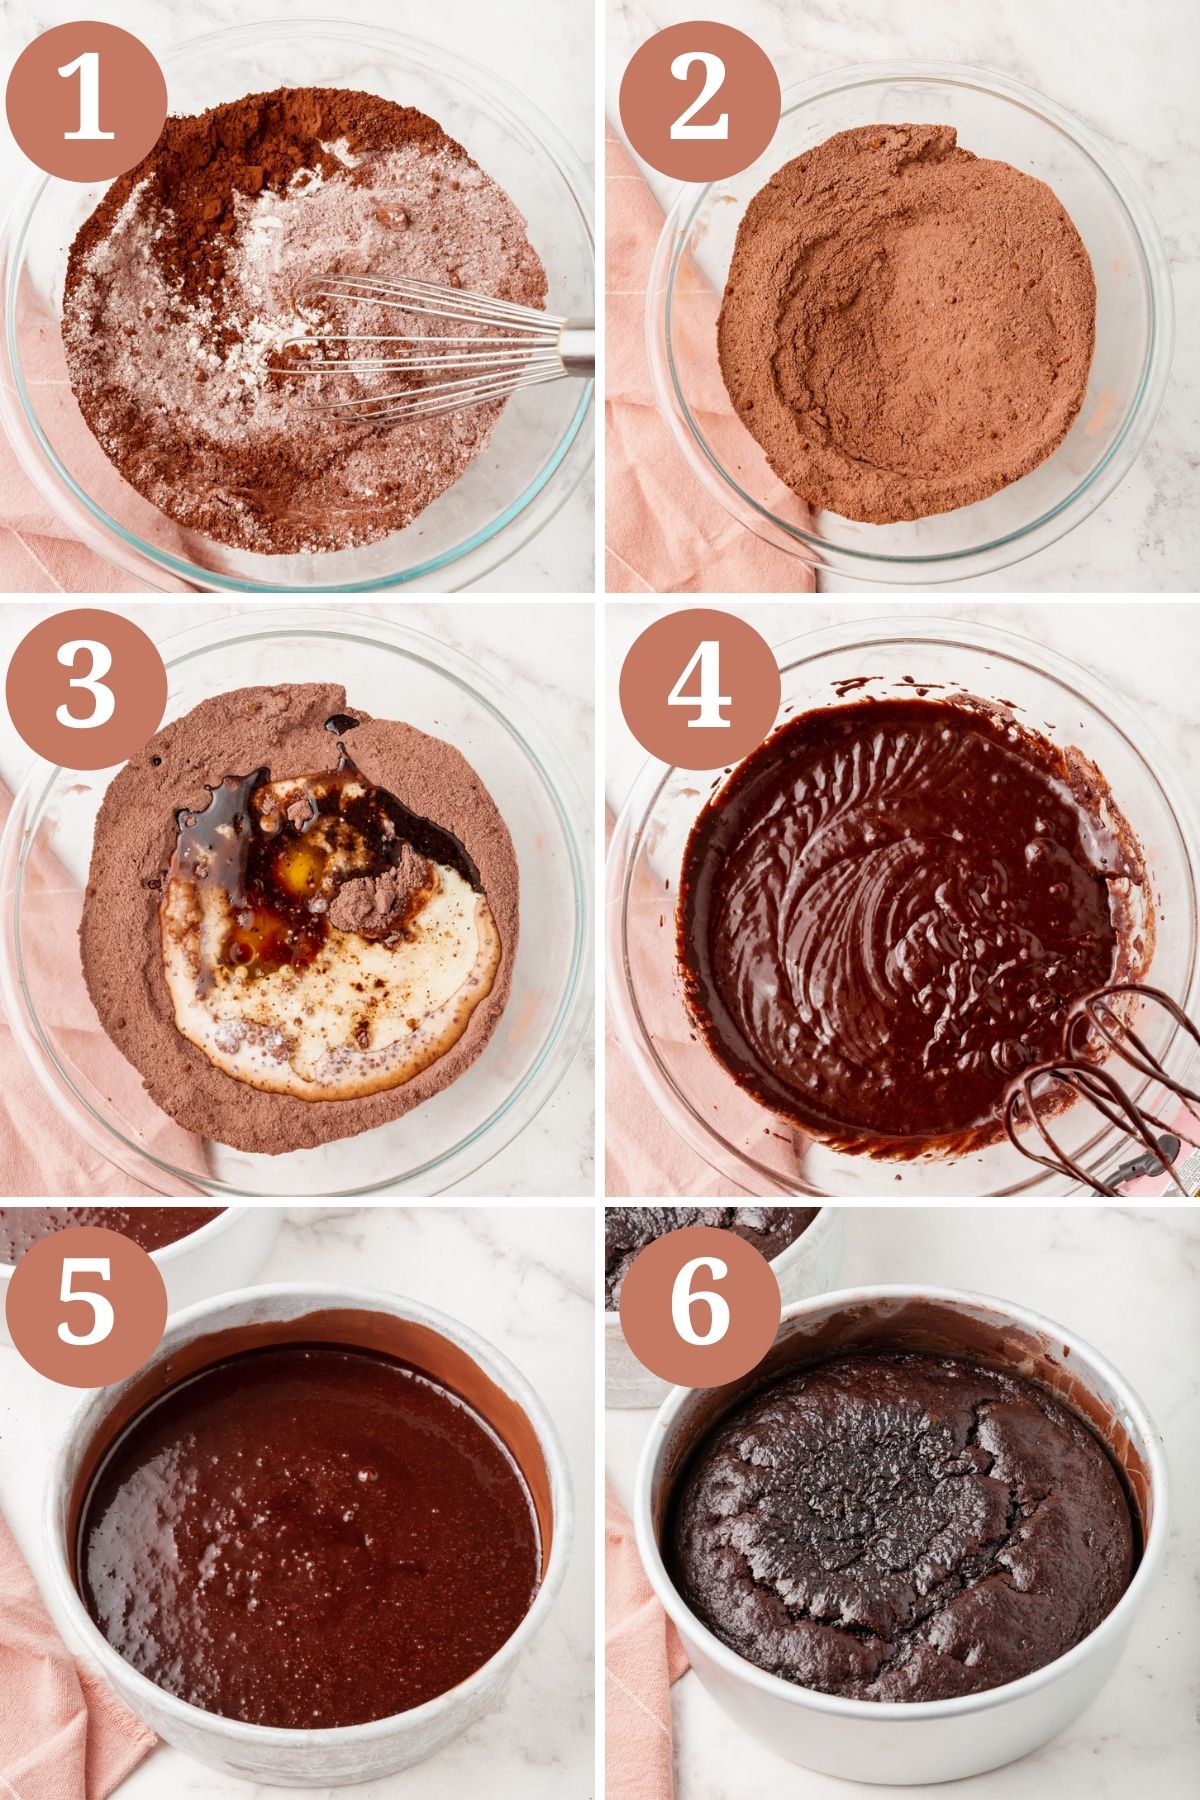 Steps for making gluten-free chocolate cake.